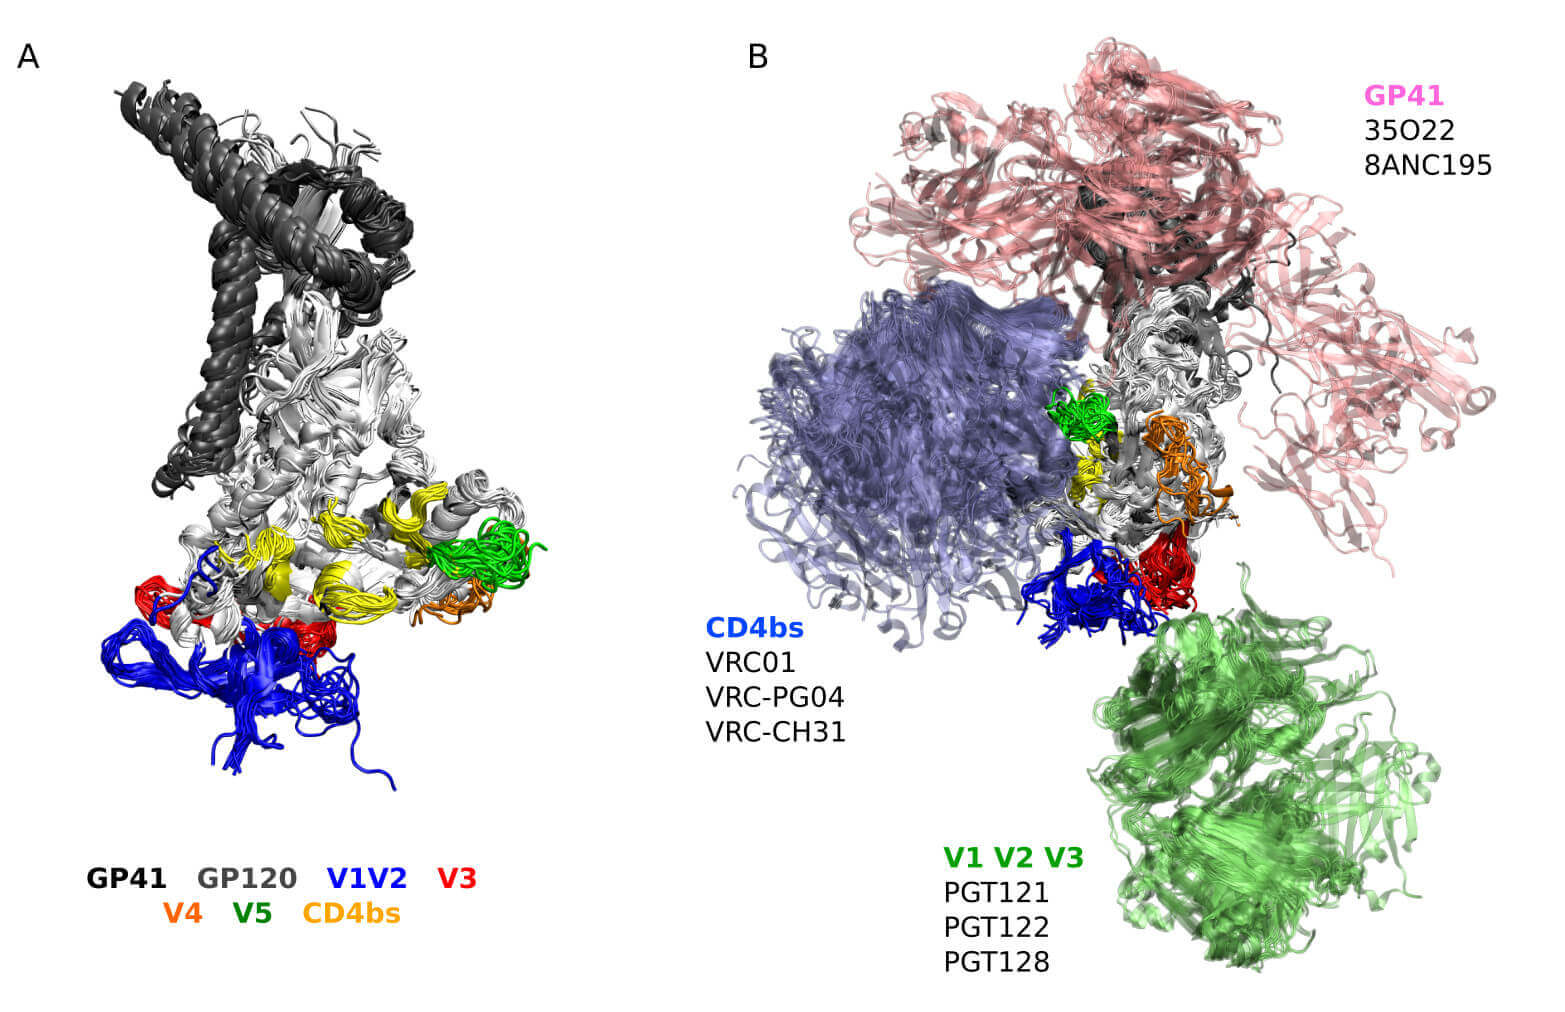 Design of immunogens to elicit broadly neutralizing antibodies against HIV targeting the CD4 binding site